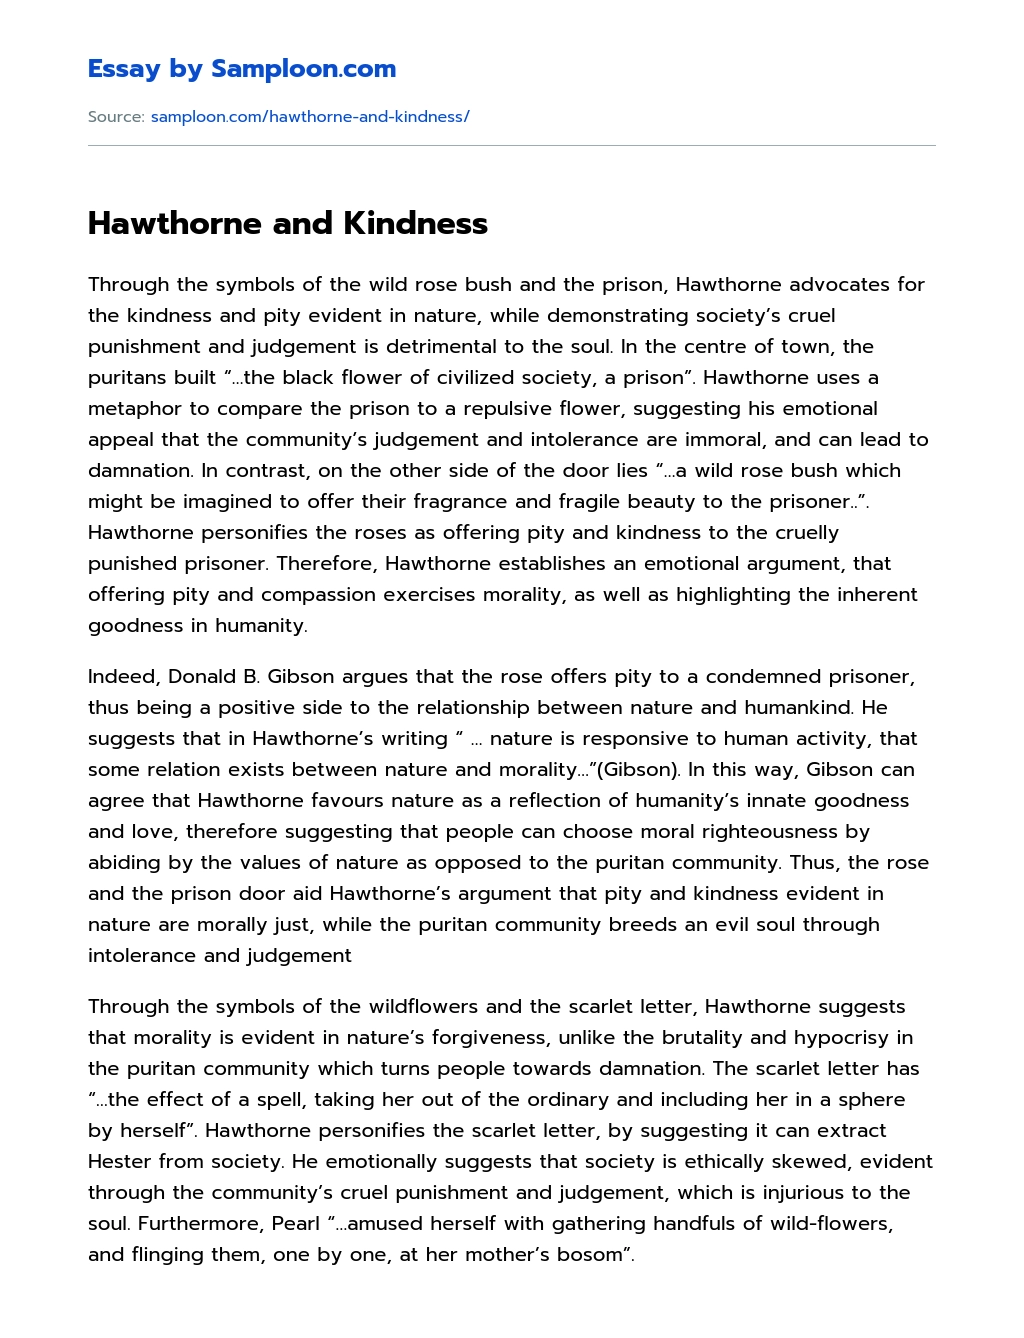 Hawthorne and Kindness essay